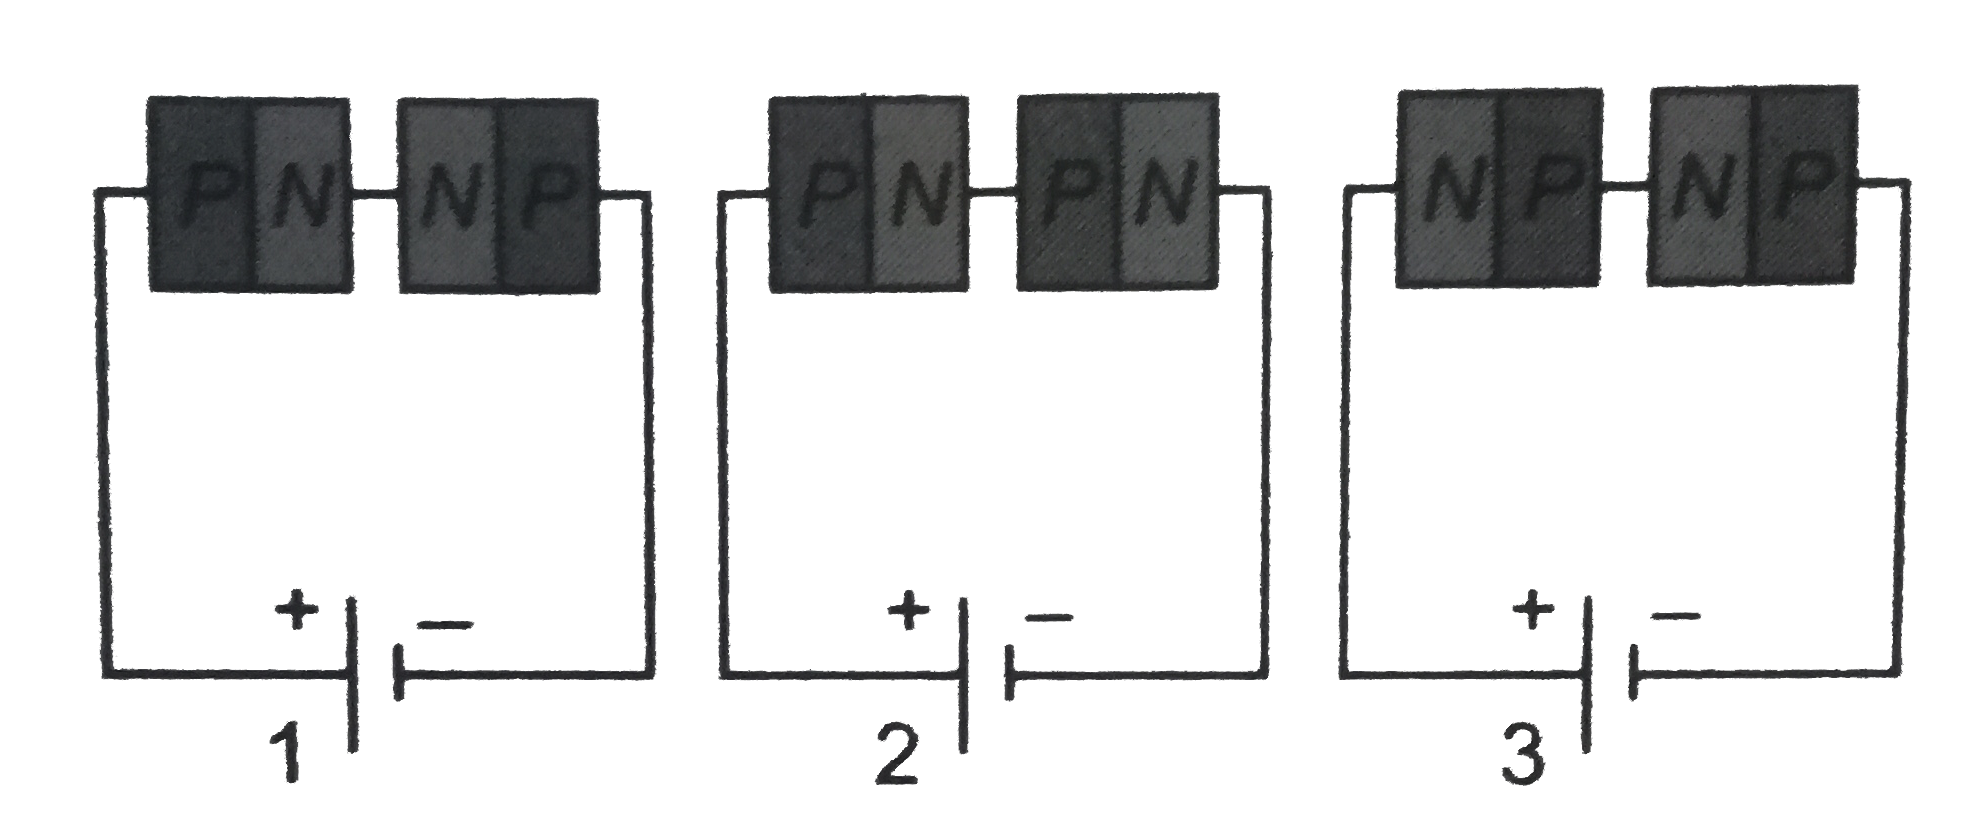 Two PN-junction can be connected in series by three different methods as shown in the figure. If the potential difference in the junction is the same, then the correct connection will be